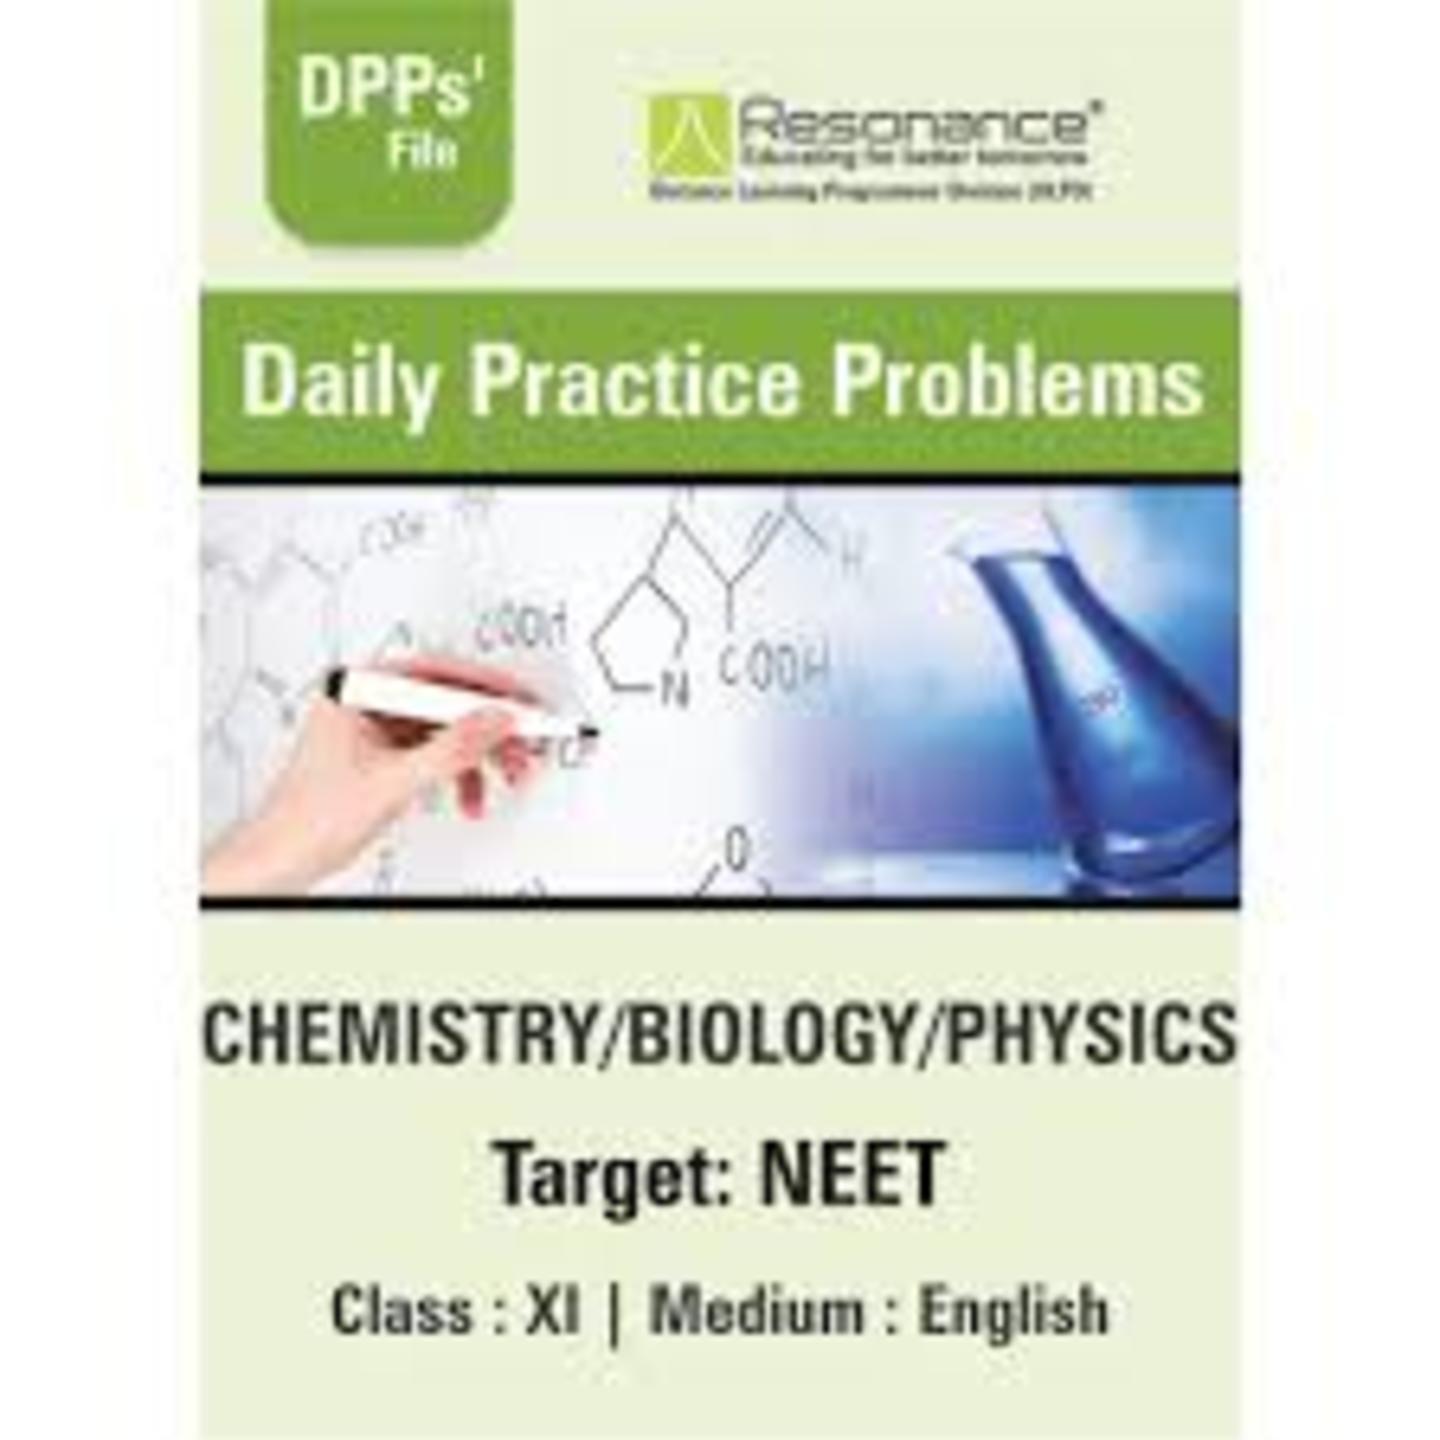 NEET- Daily Practice Problem  DPPs File -XII